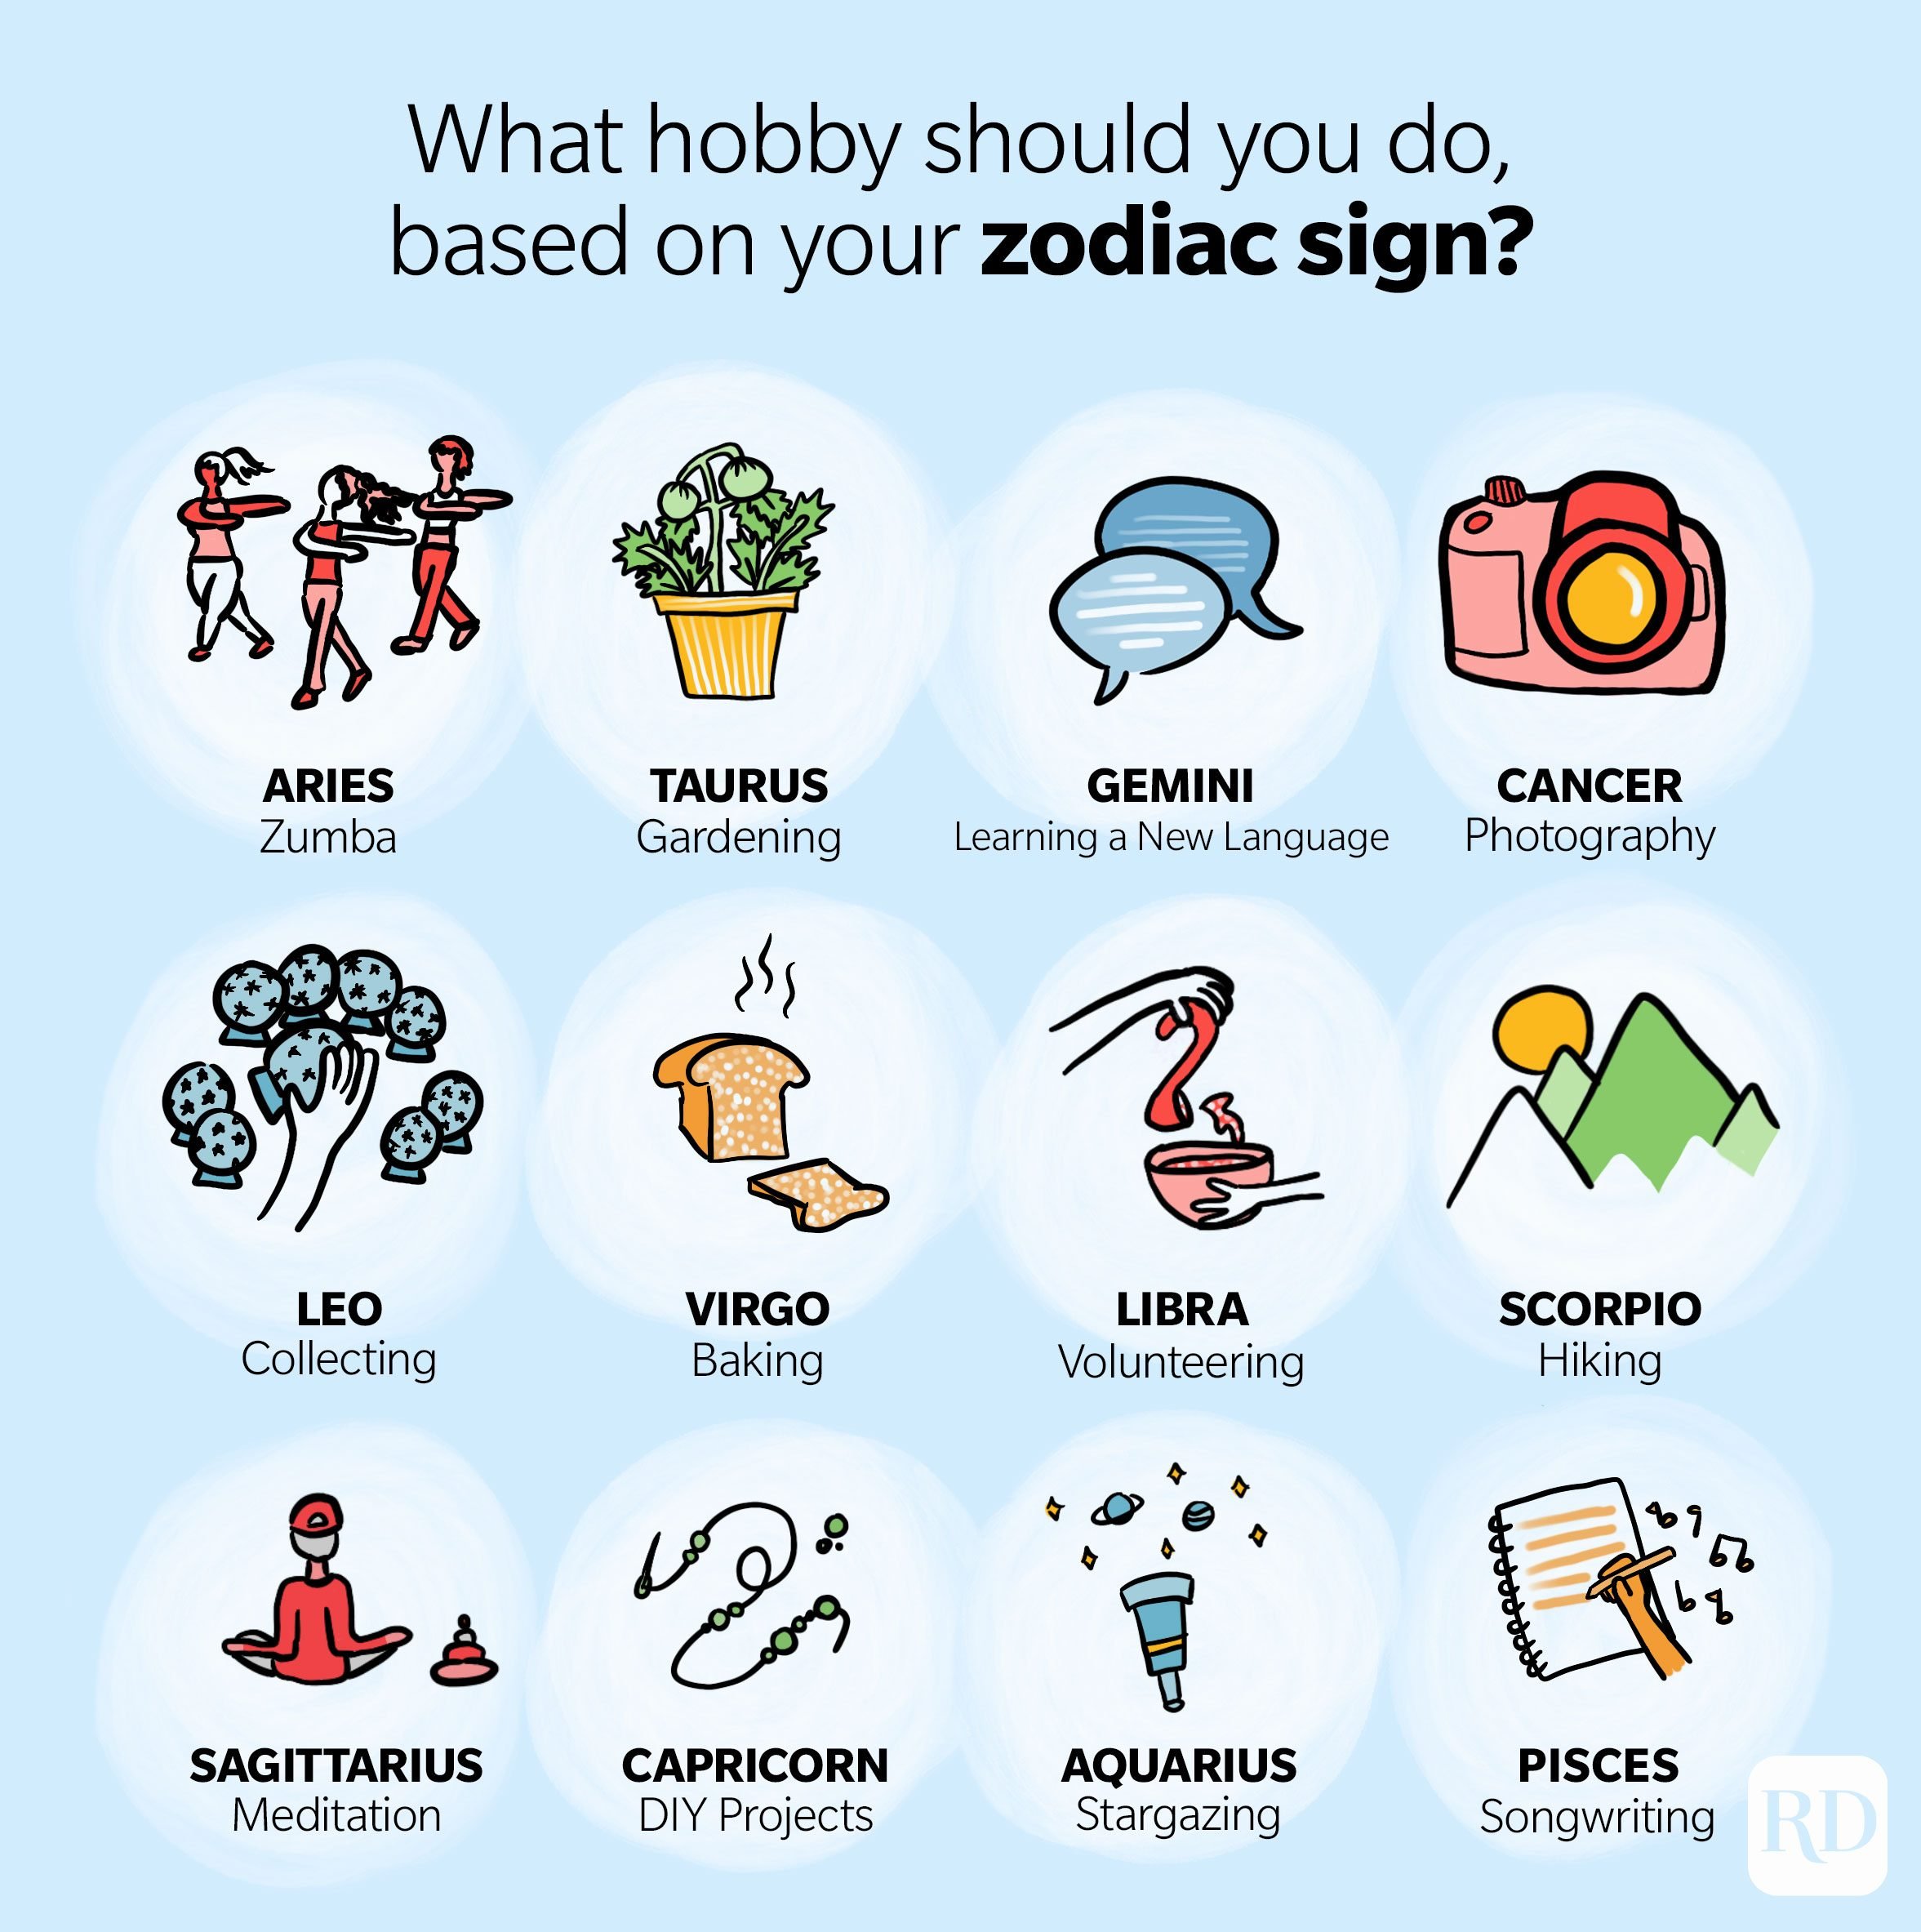 The Best Hobby for You, Based on Your Zodiac Sign